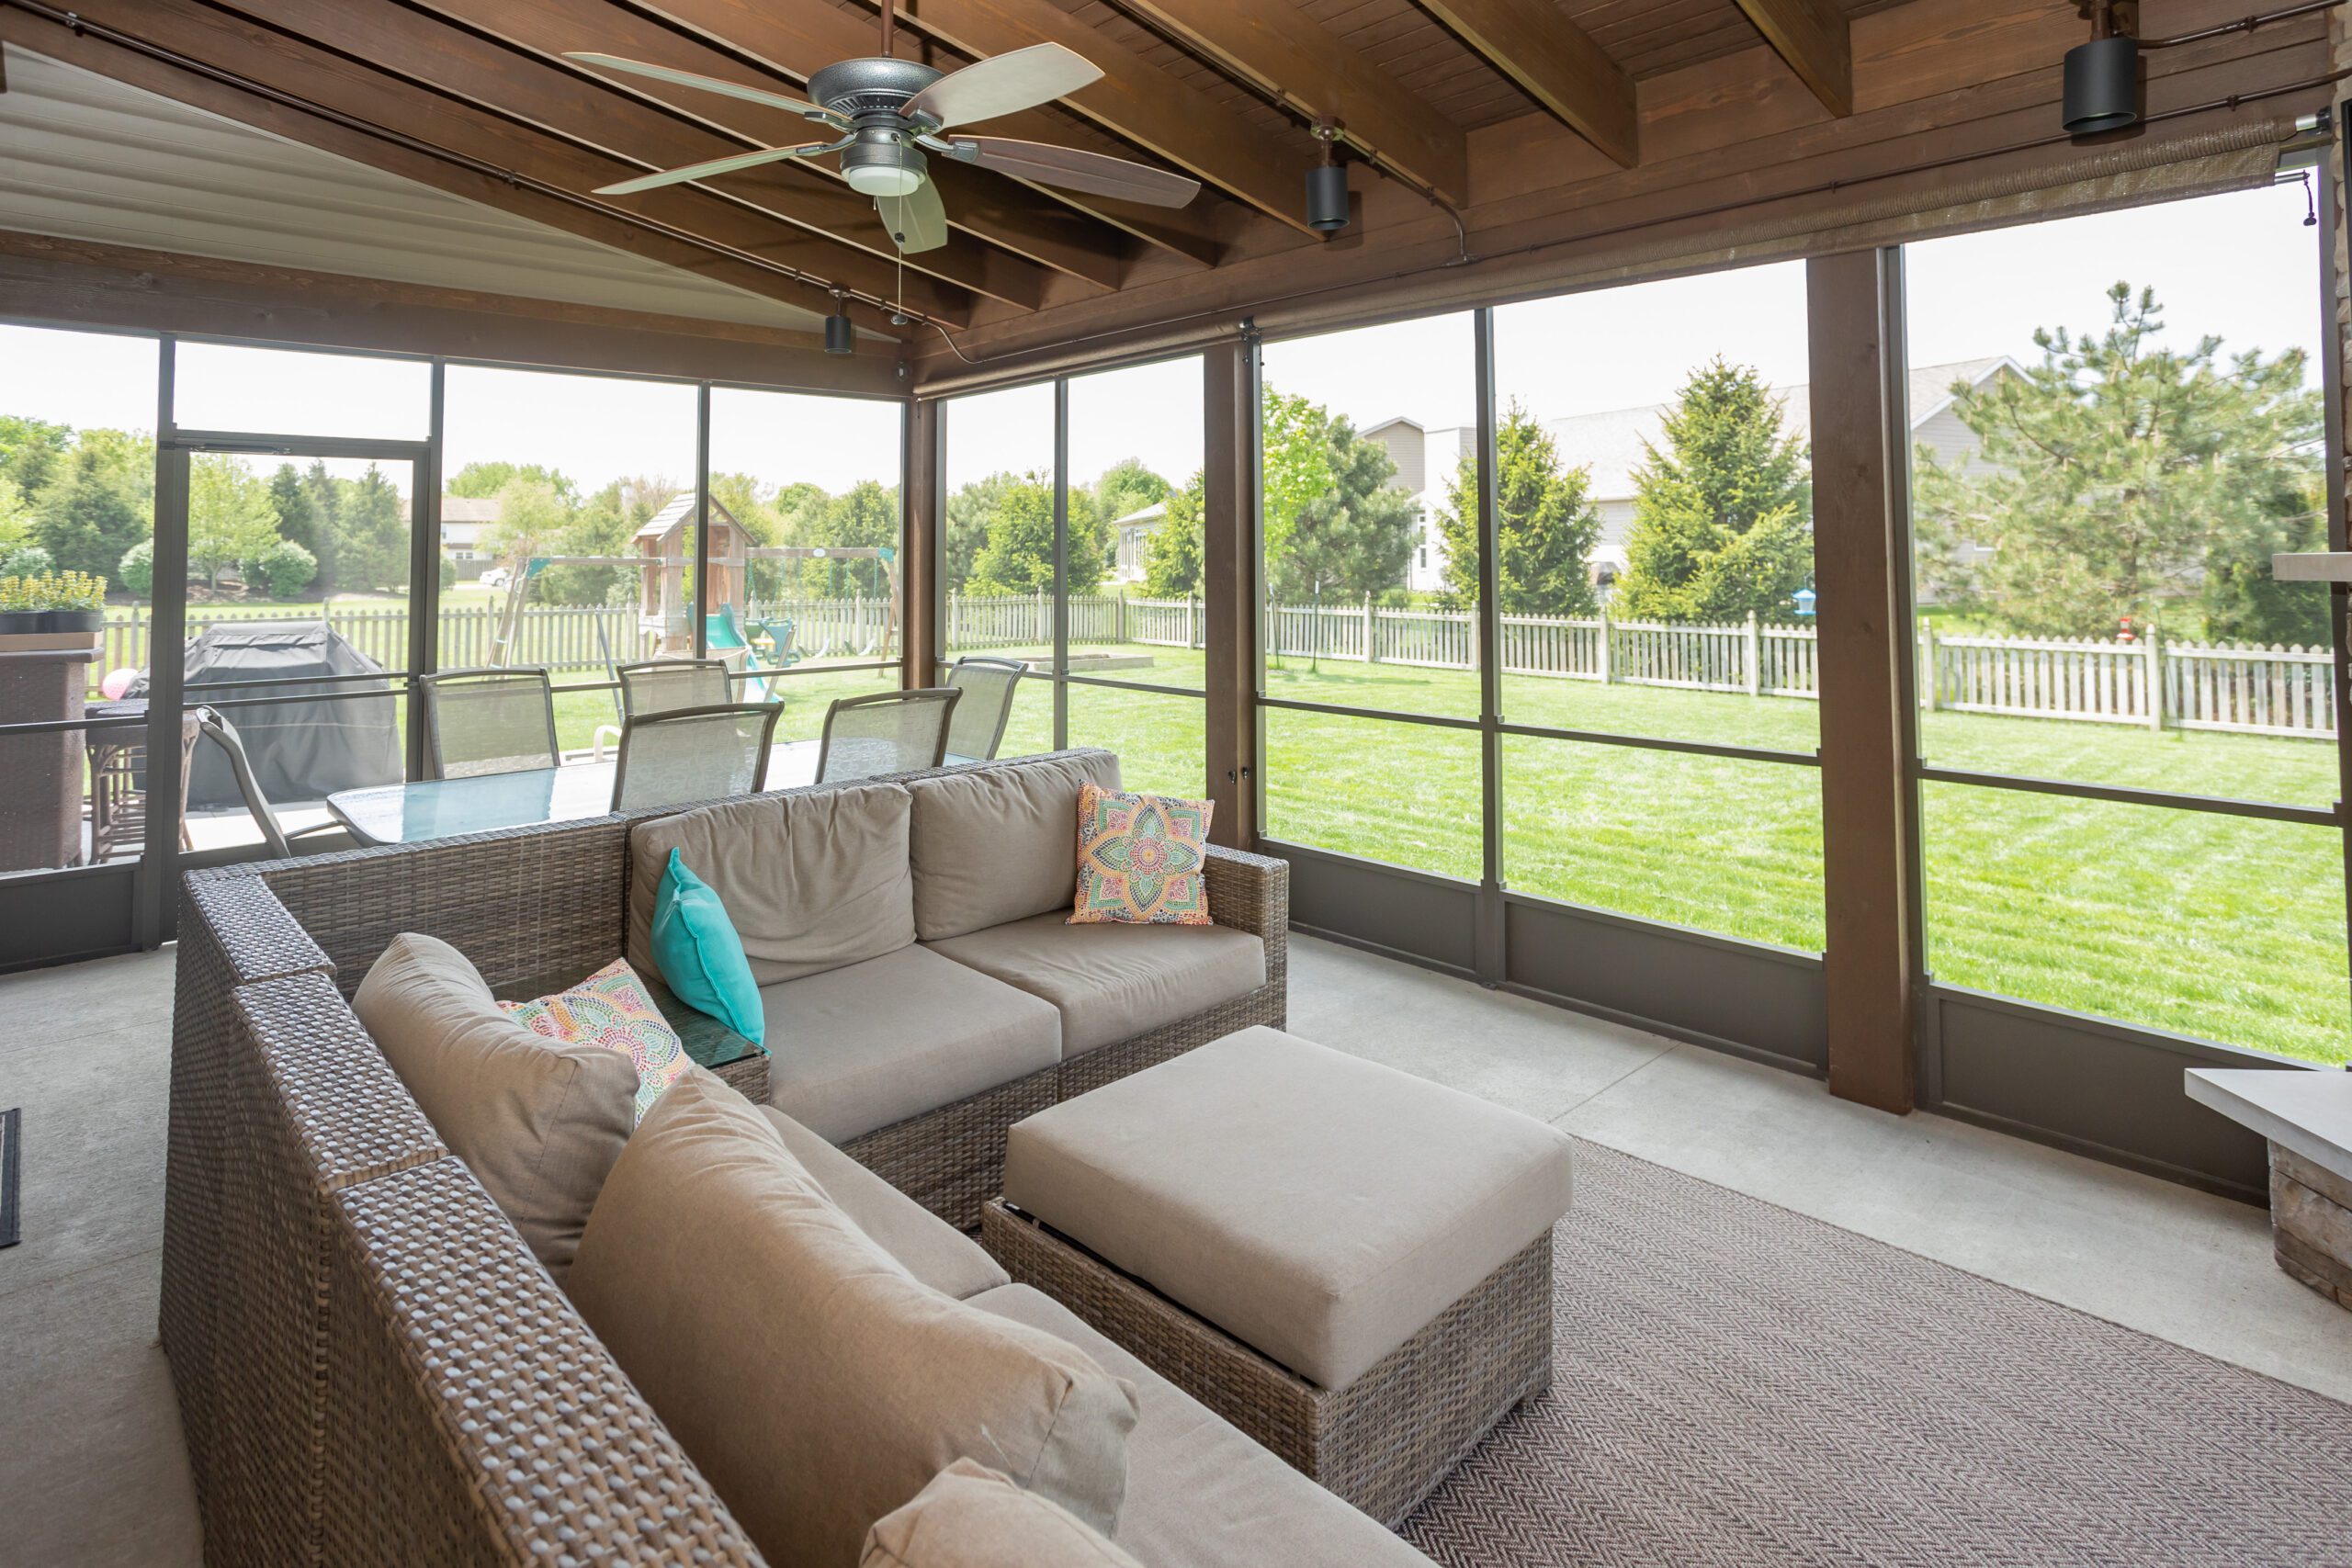 coors remodeling does sunroom interiors